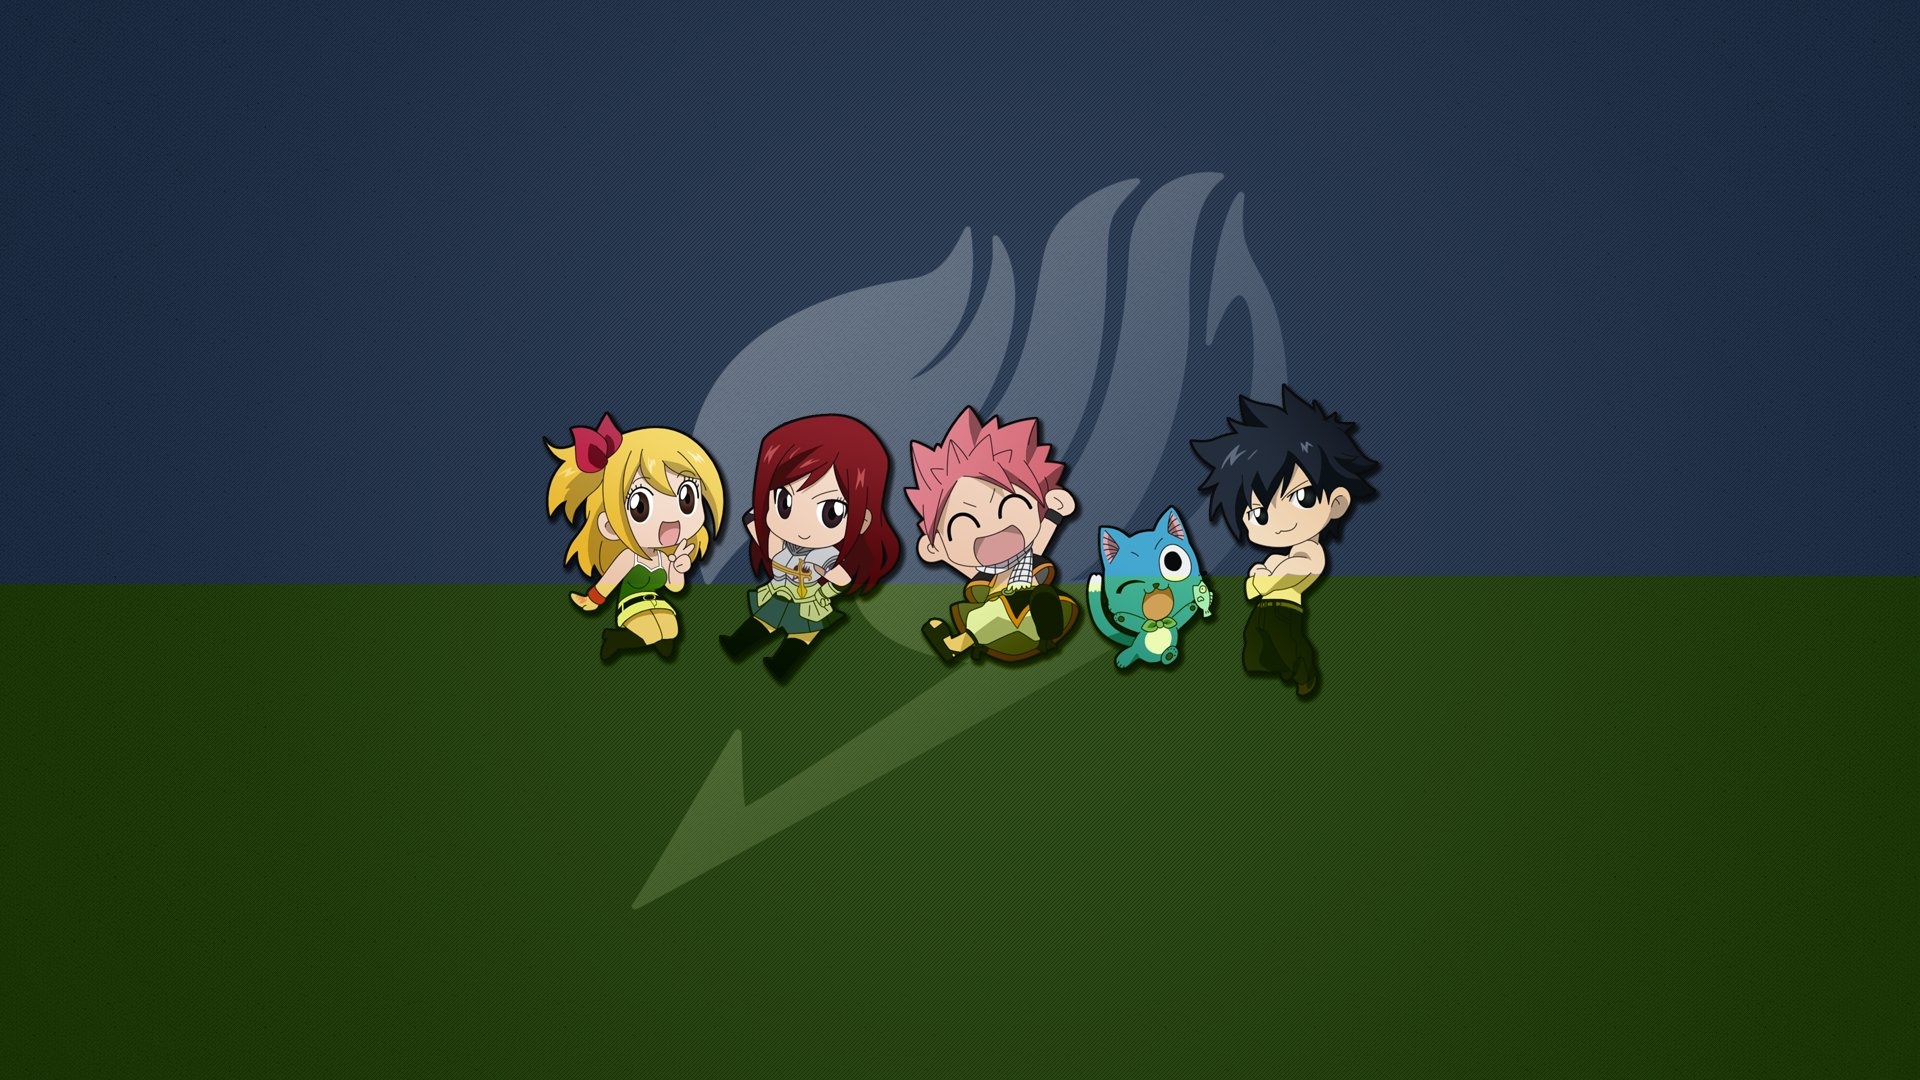 Natsu (Fairy Tail): Erza Scarlet, Happy, Lucy Heartfilia and Gray Fullbuster, Cartoon characters. 1920x1080 Full HD Wallpaper.